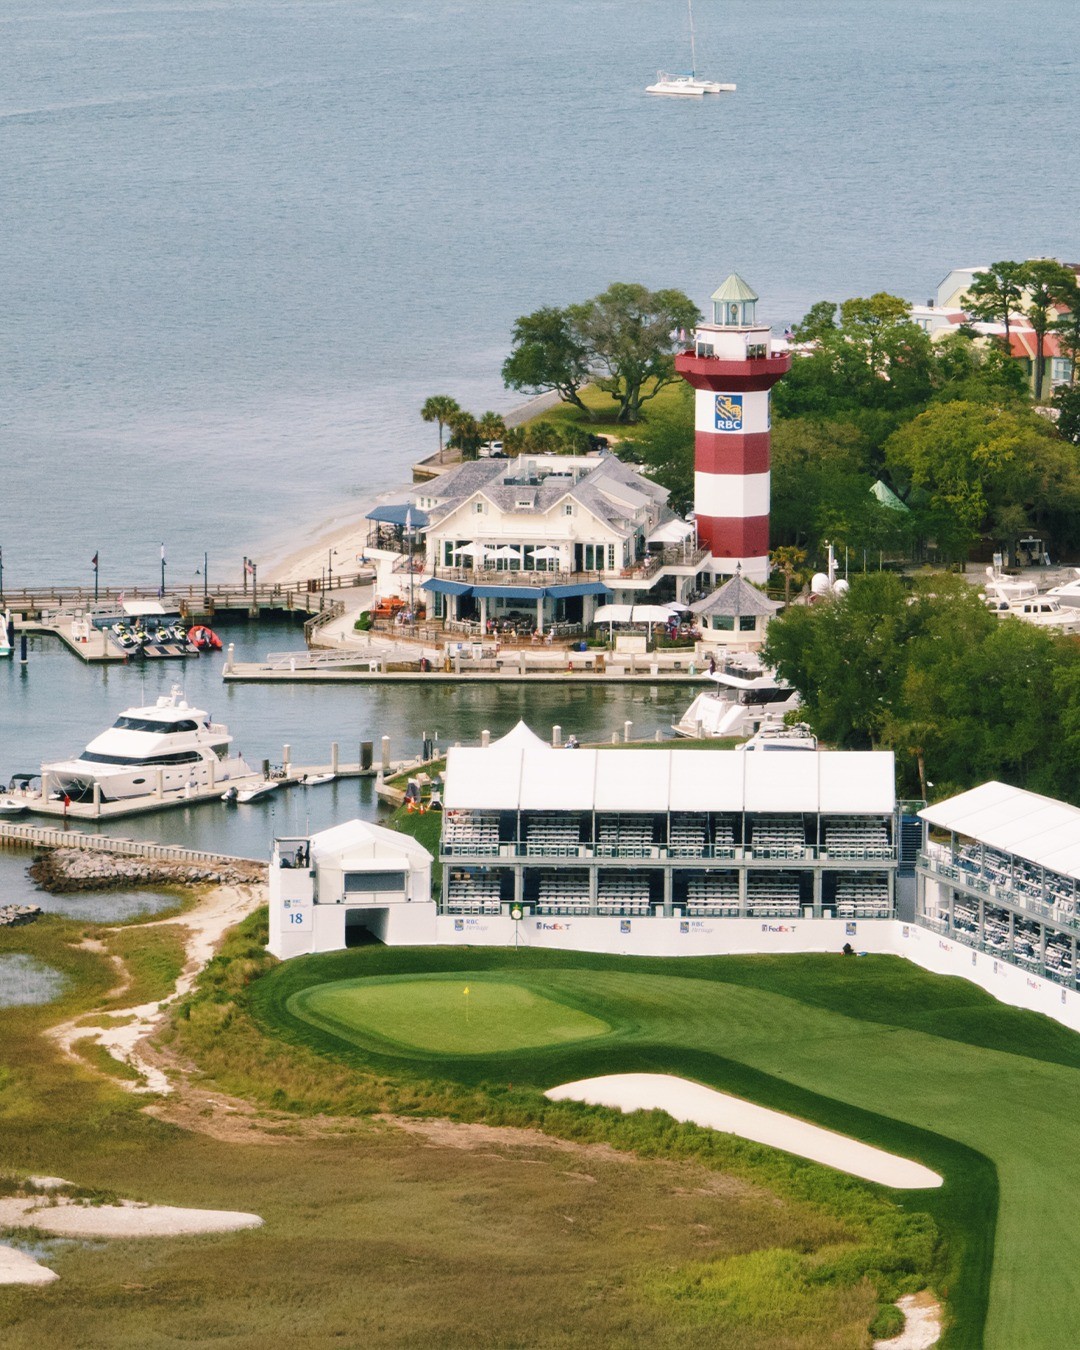 Hole No. 18 at Harbour Town with its iconic lighthouse in background